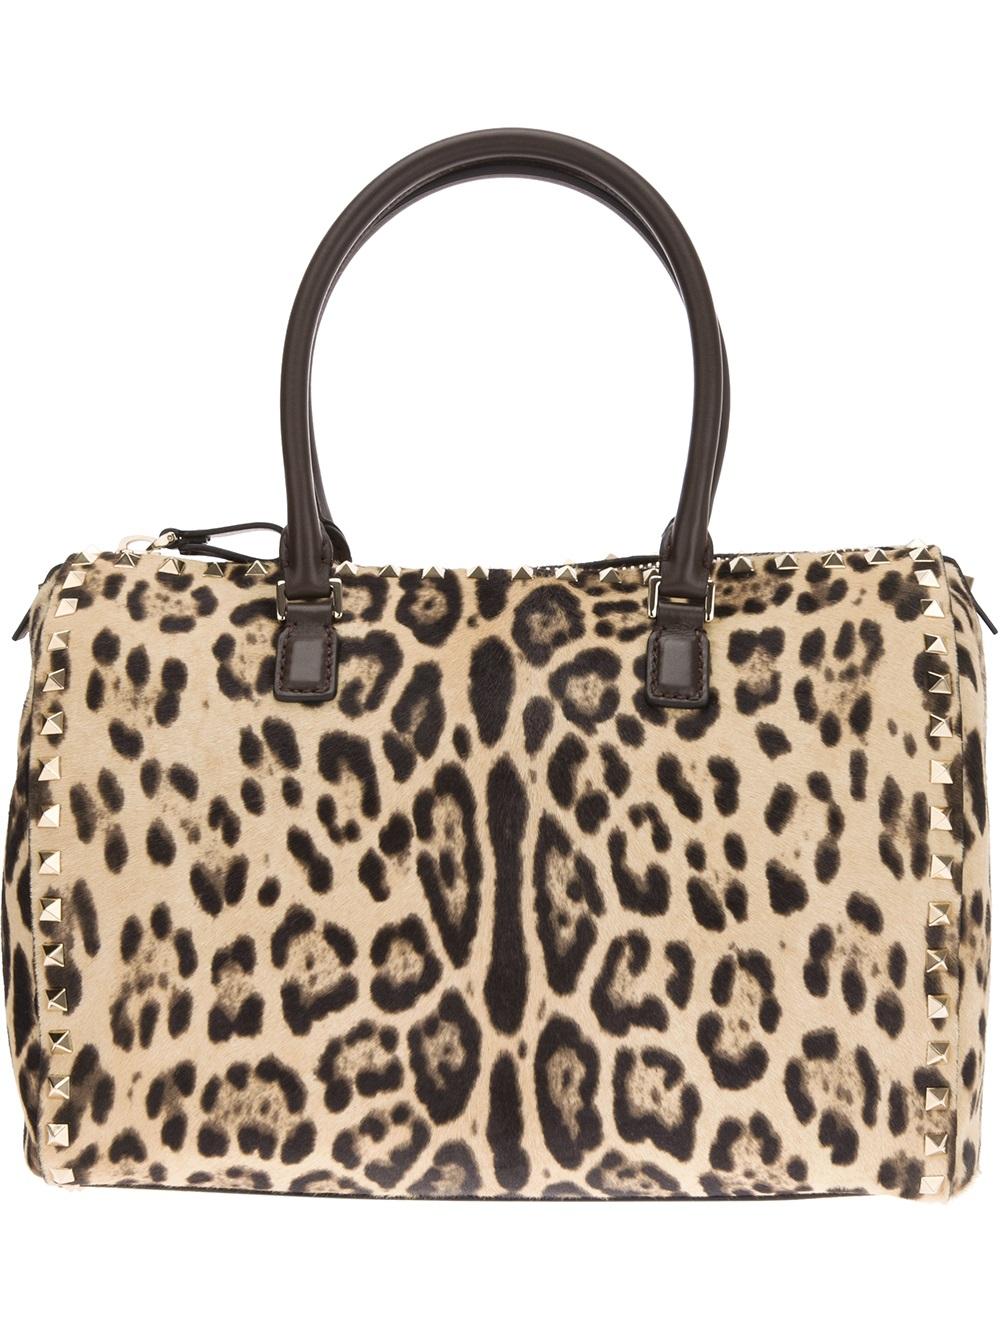 Valentino Leopard Print Duffle Bag in Natural - Lyst